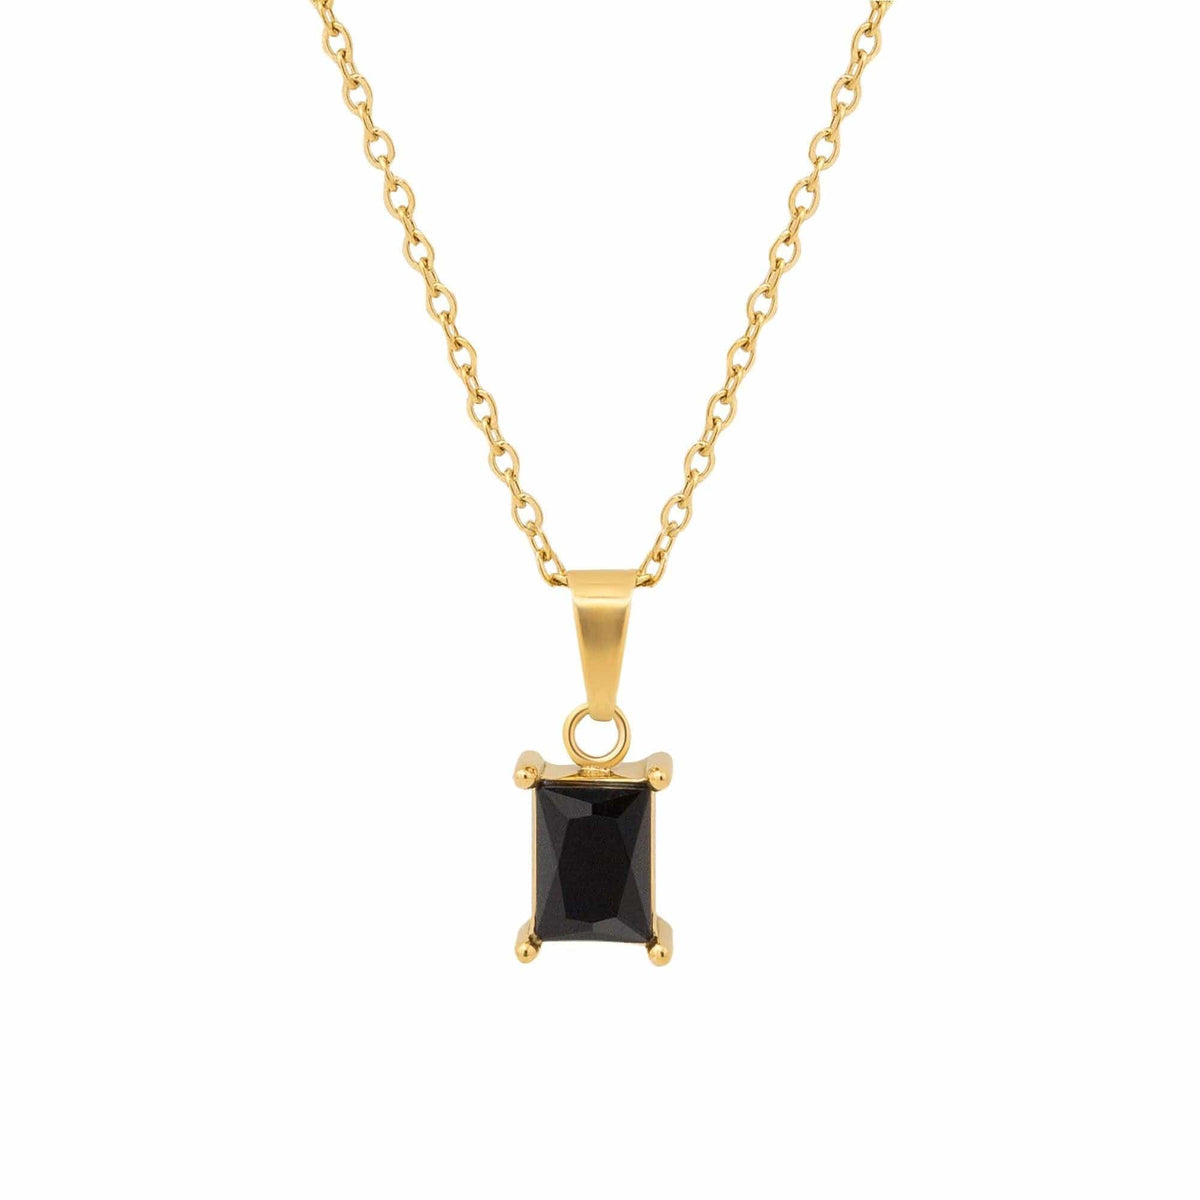 BohoMoon Stainless Steel Alma Necklace Gold / Black